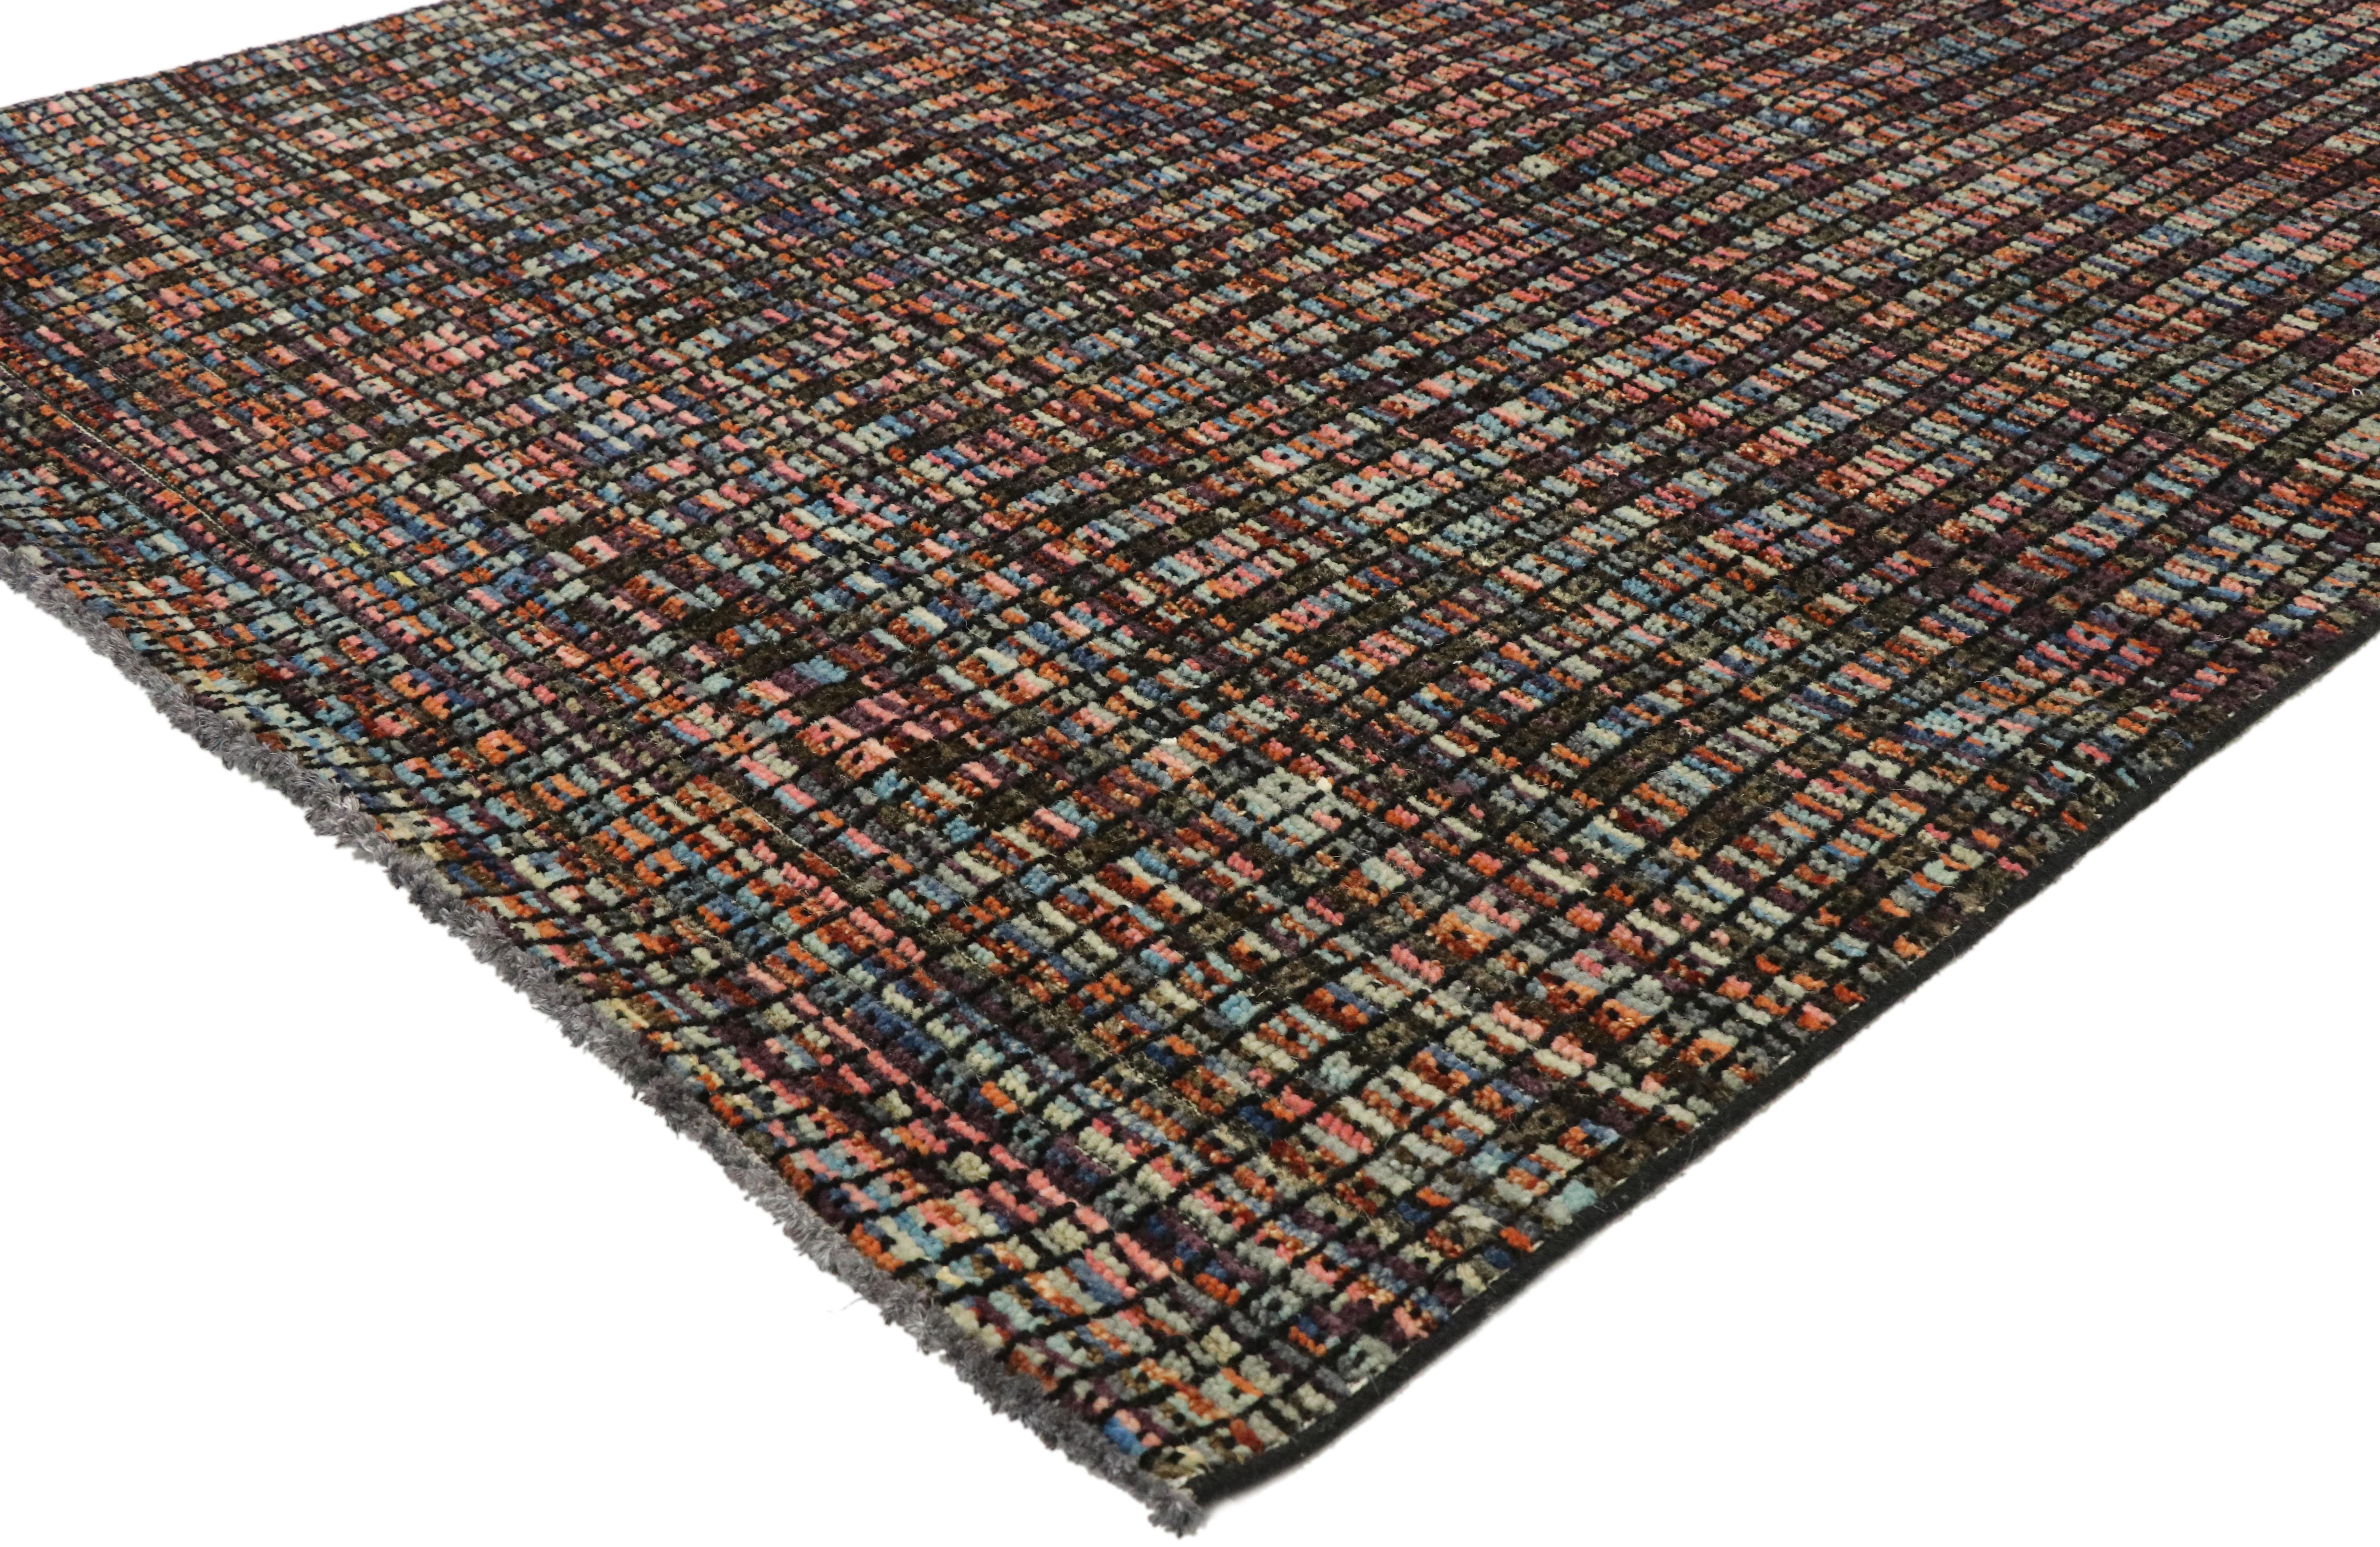 80618, new contemporary Moroccan rug with Modern American Colonial style. Displaying well-balanced symmetry with a simple design aesthetic, this hand knotted wool Moroccan area rug beautifully embodies modern American Colonial style with a